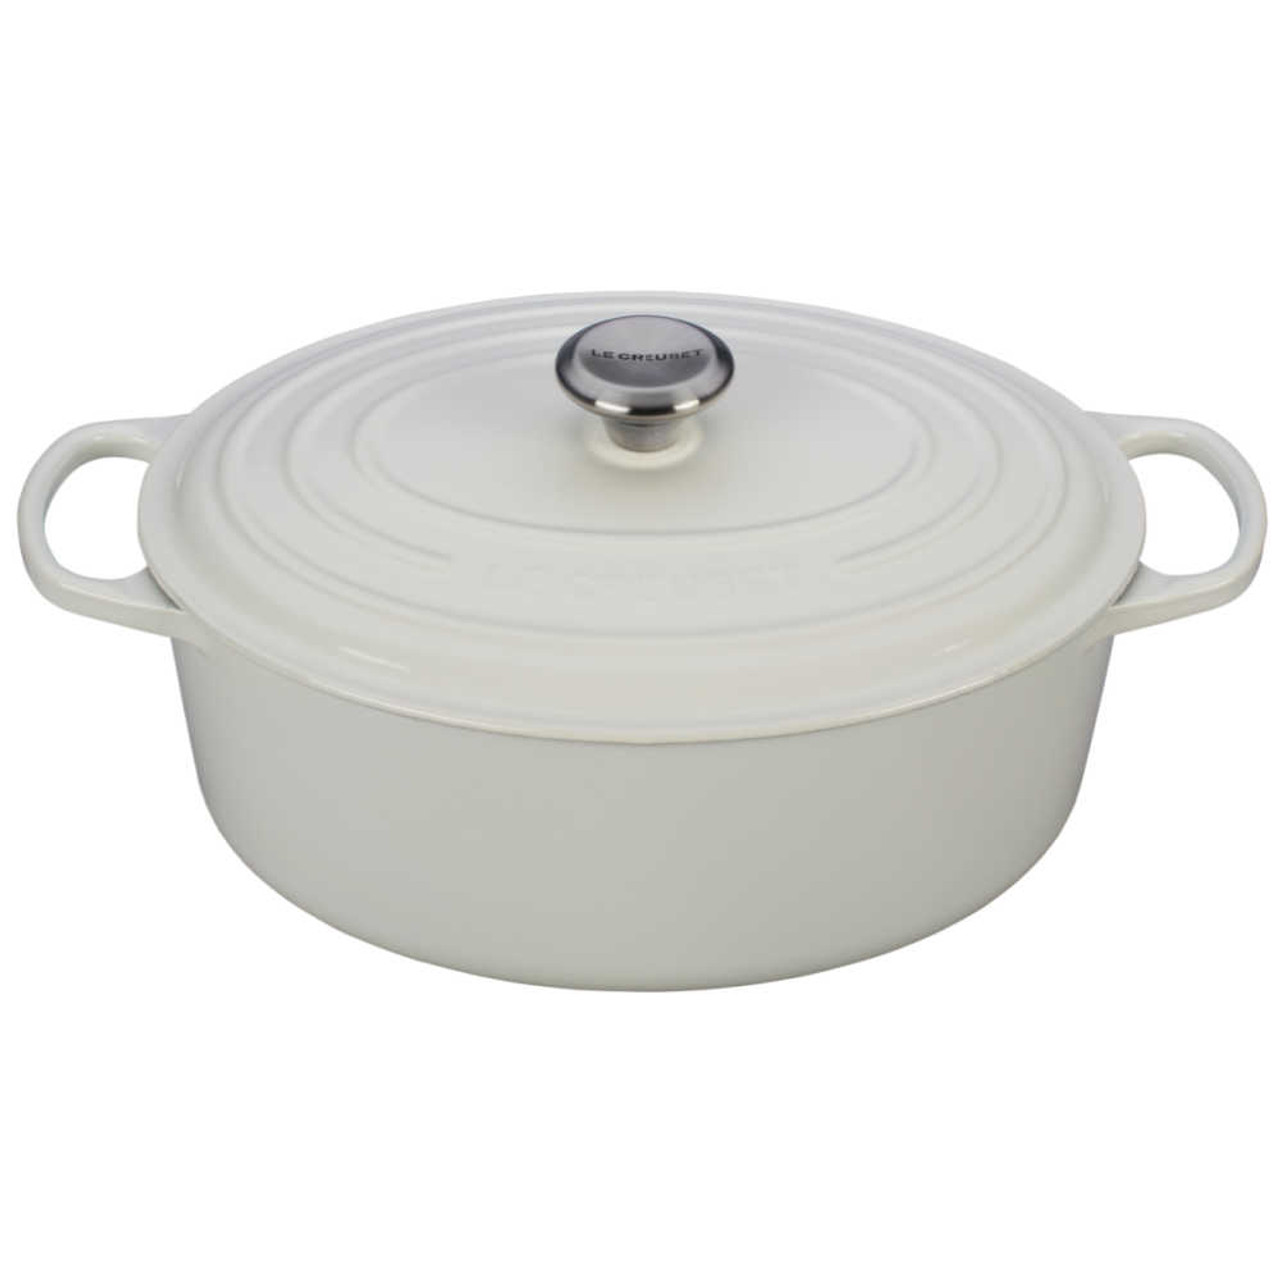 Lodge 7 qt. Enameled Cast Iron Oval Dutch Oven - Oyster White